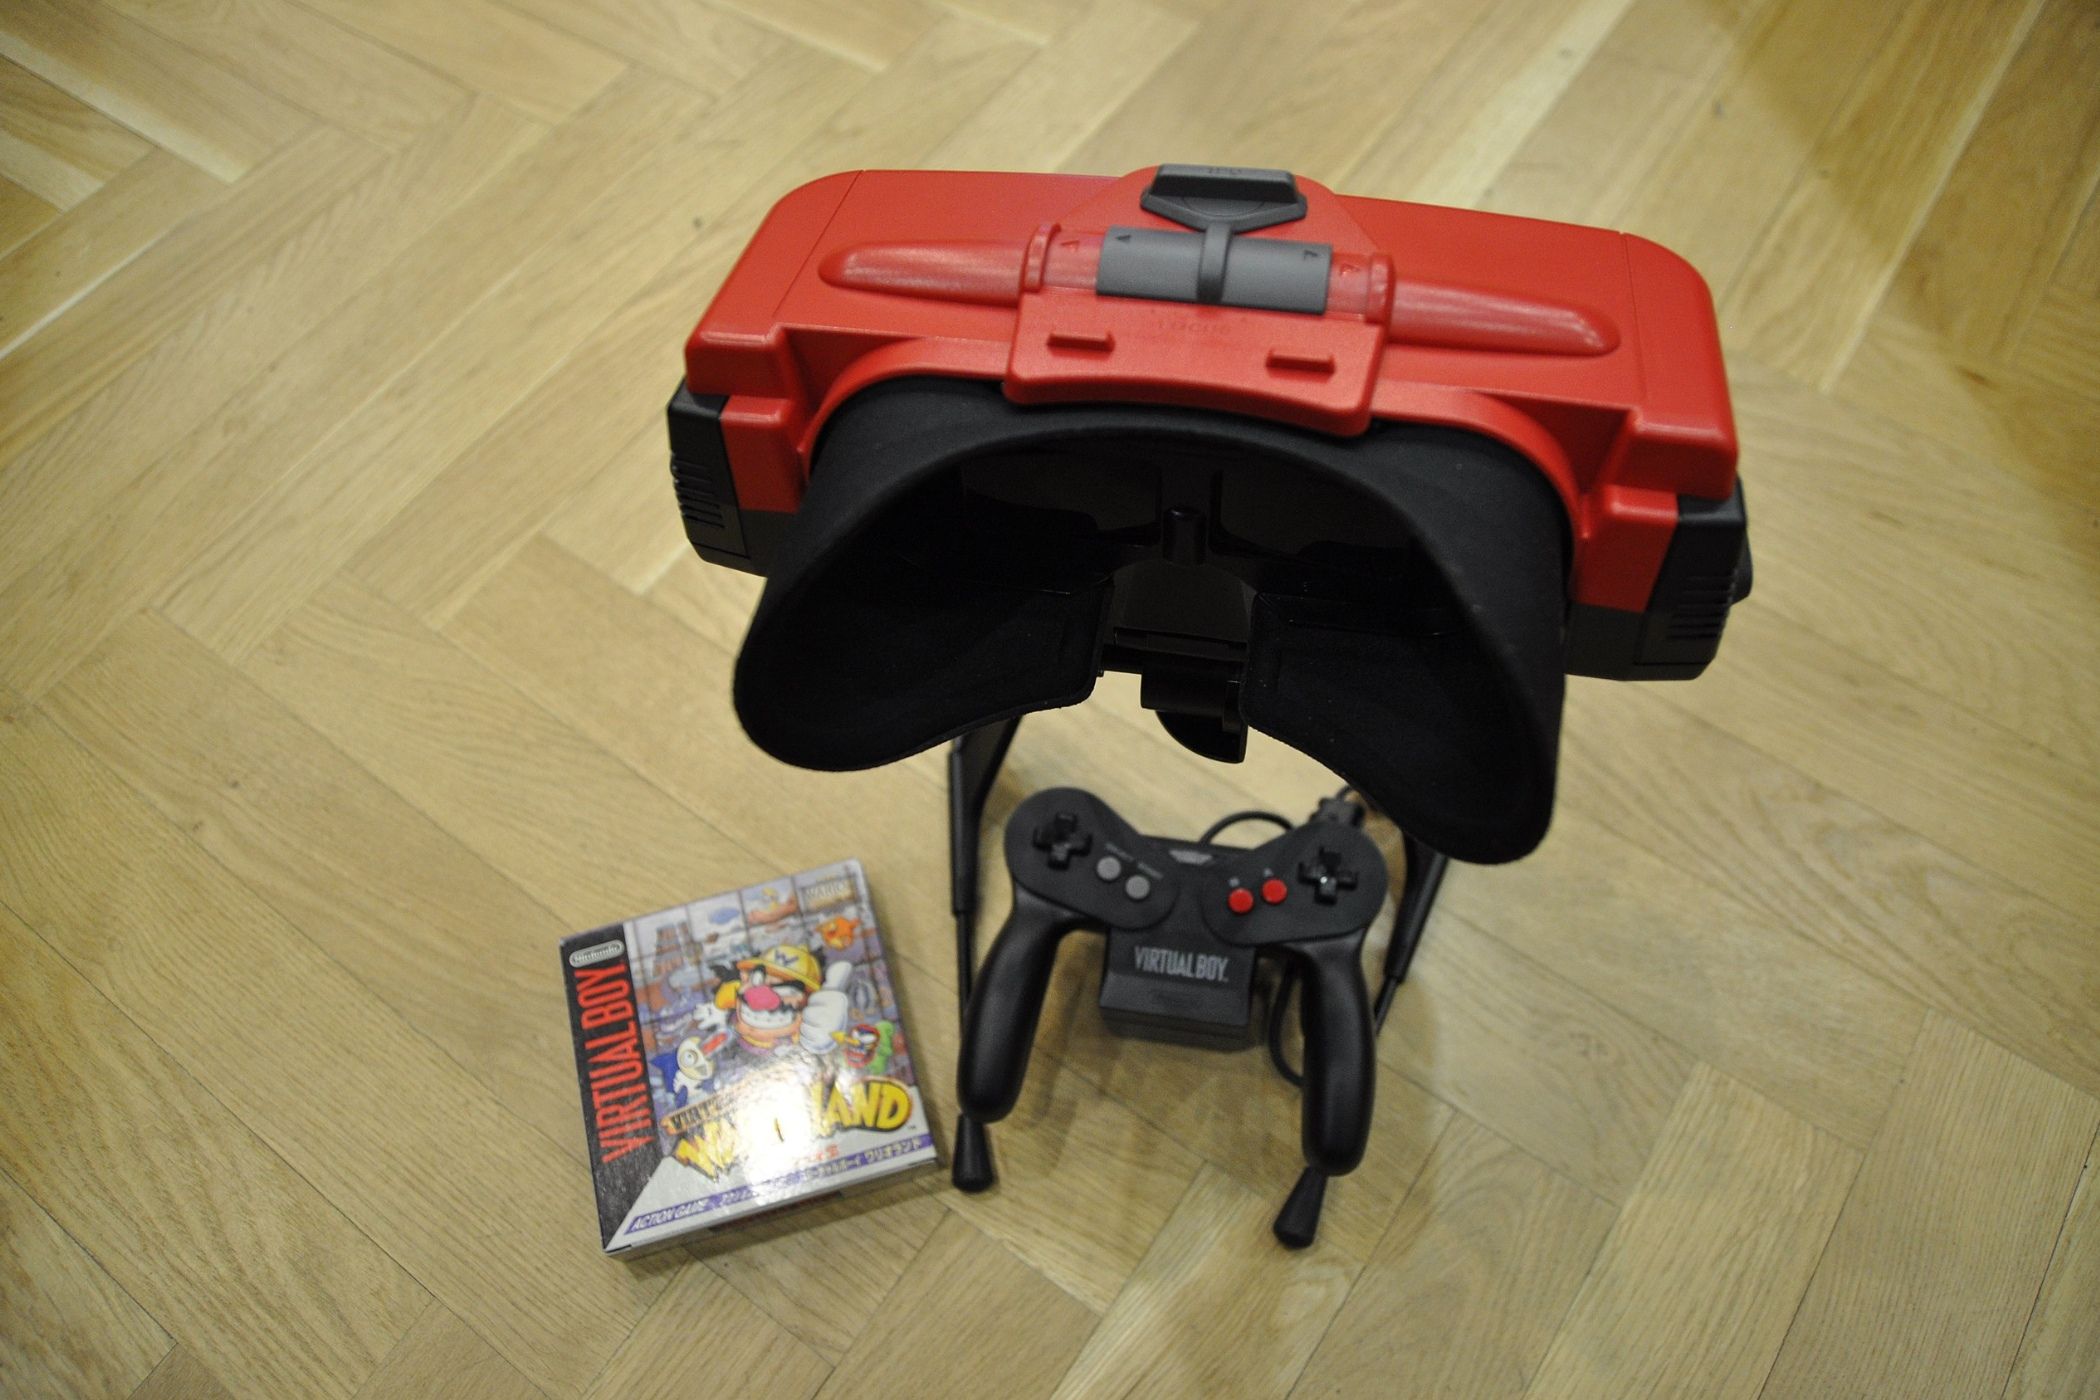 Nintendo Virtual Boy with a game box on the floor